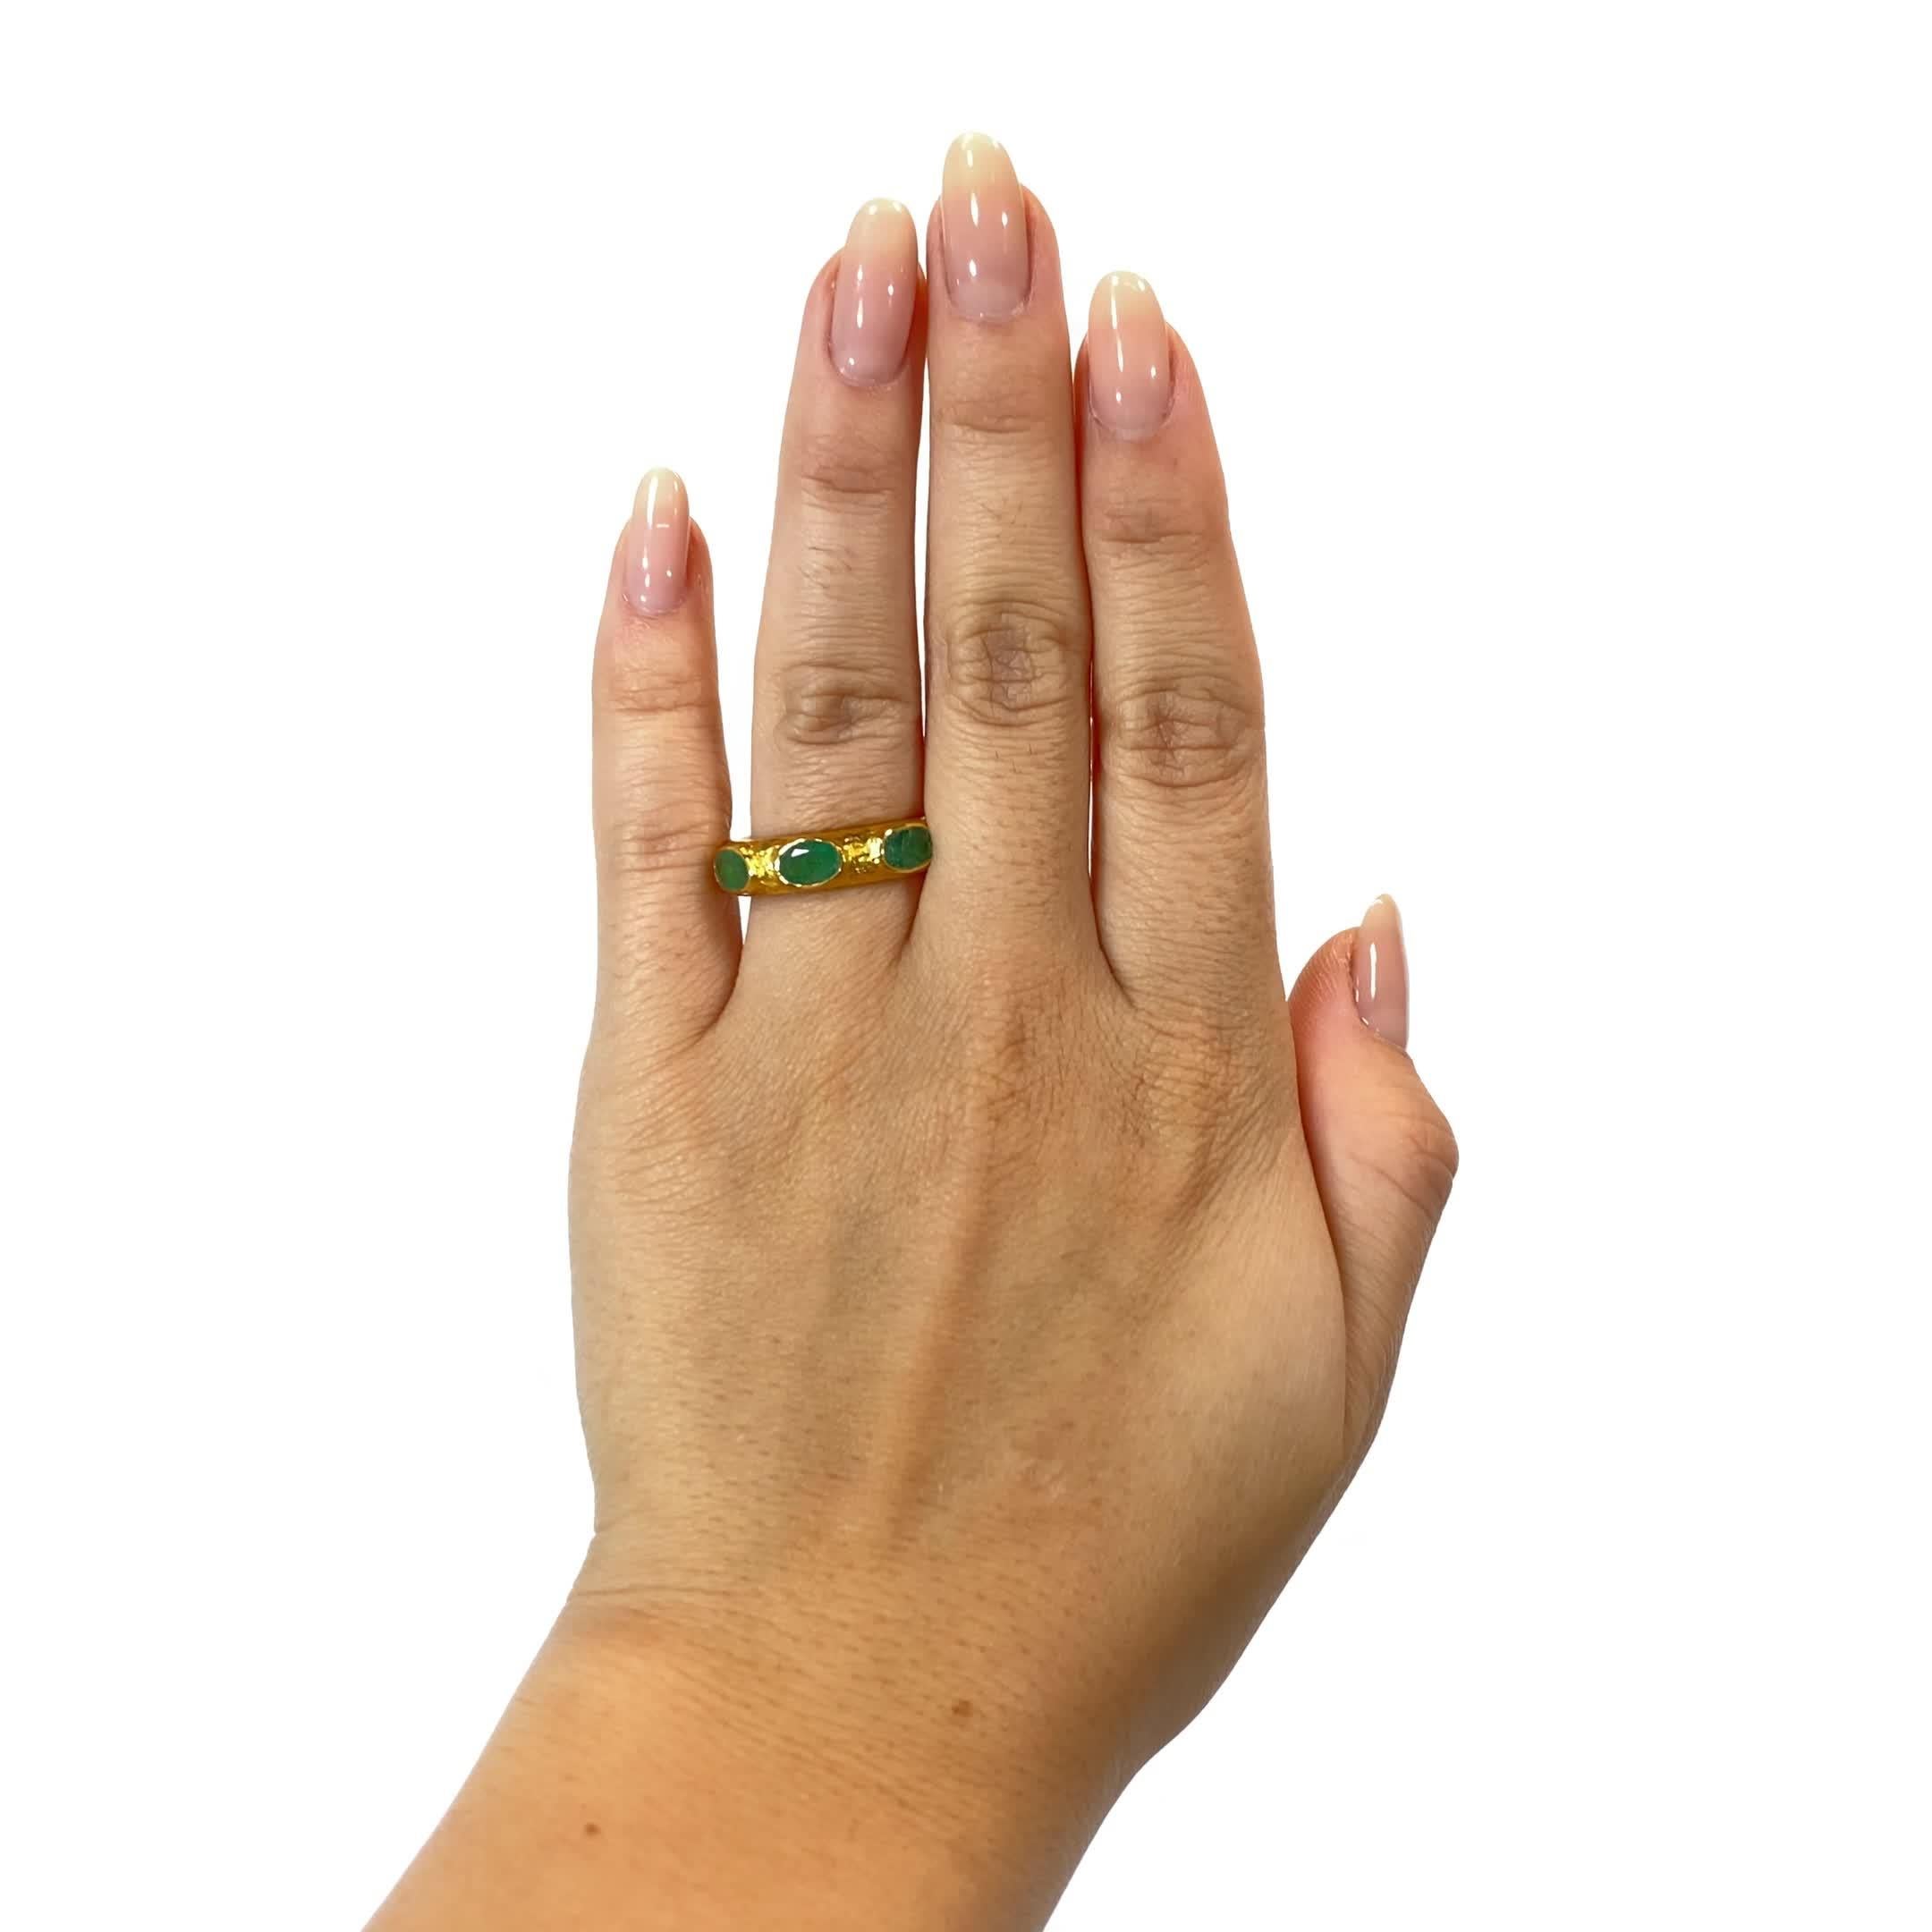 ARA24K Three Stone Emerald Textured 24 Karat Gold Band. The ring features 3 oval cut emeralds weighing approximately 1 carat. Circa 2000s. Size 7.

About The Piece: There is just something magical and joyful about these vibrant emeralds. Perfect for